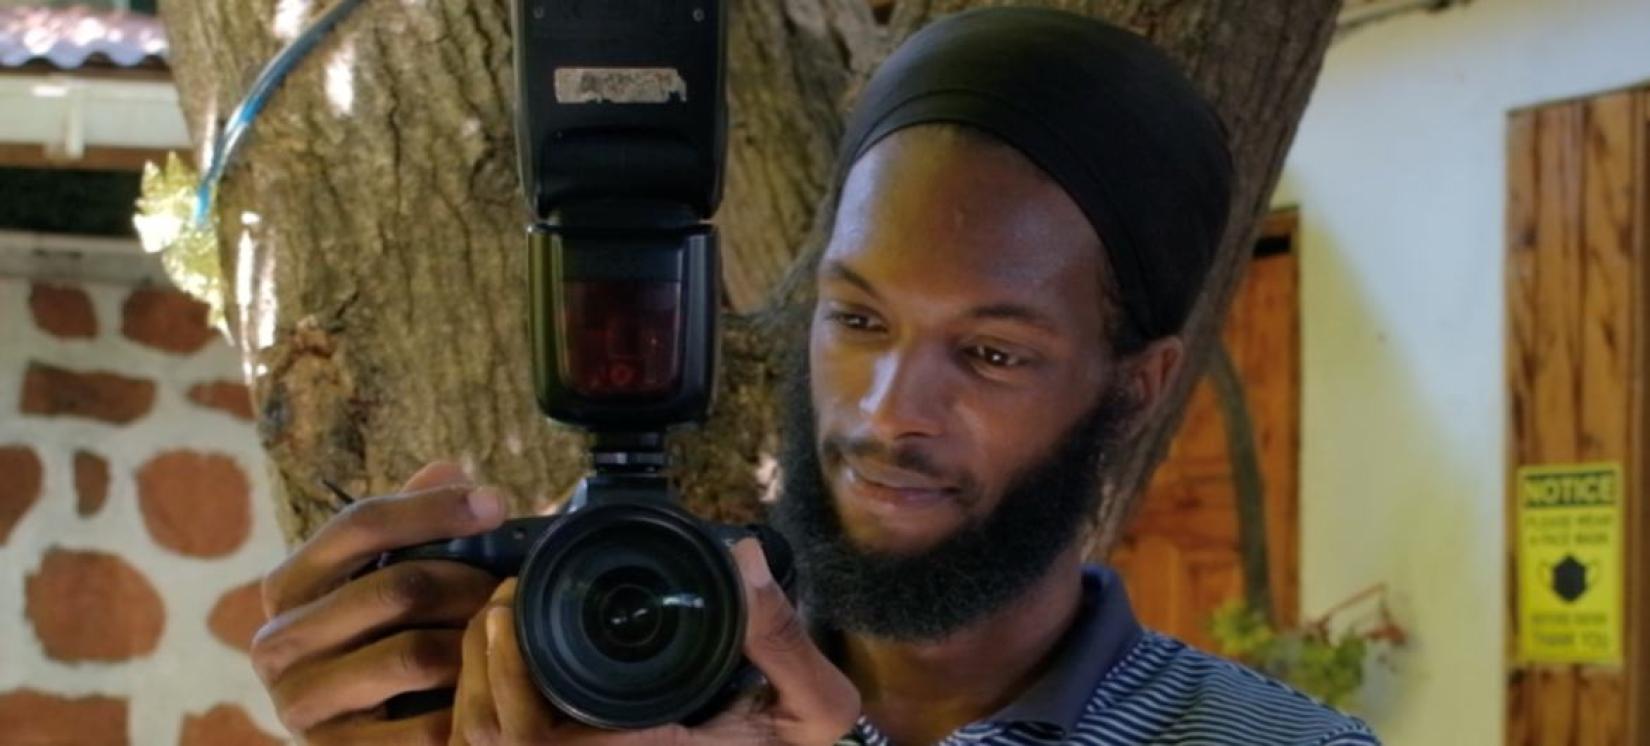 A young man holding a camera, and twisting the zoom on the lens